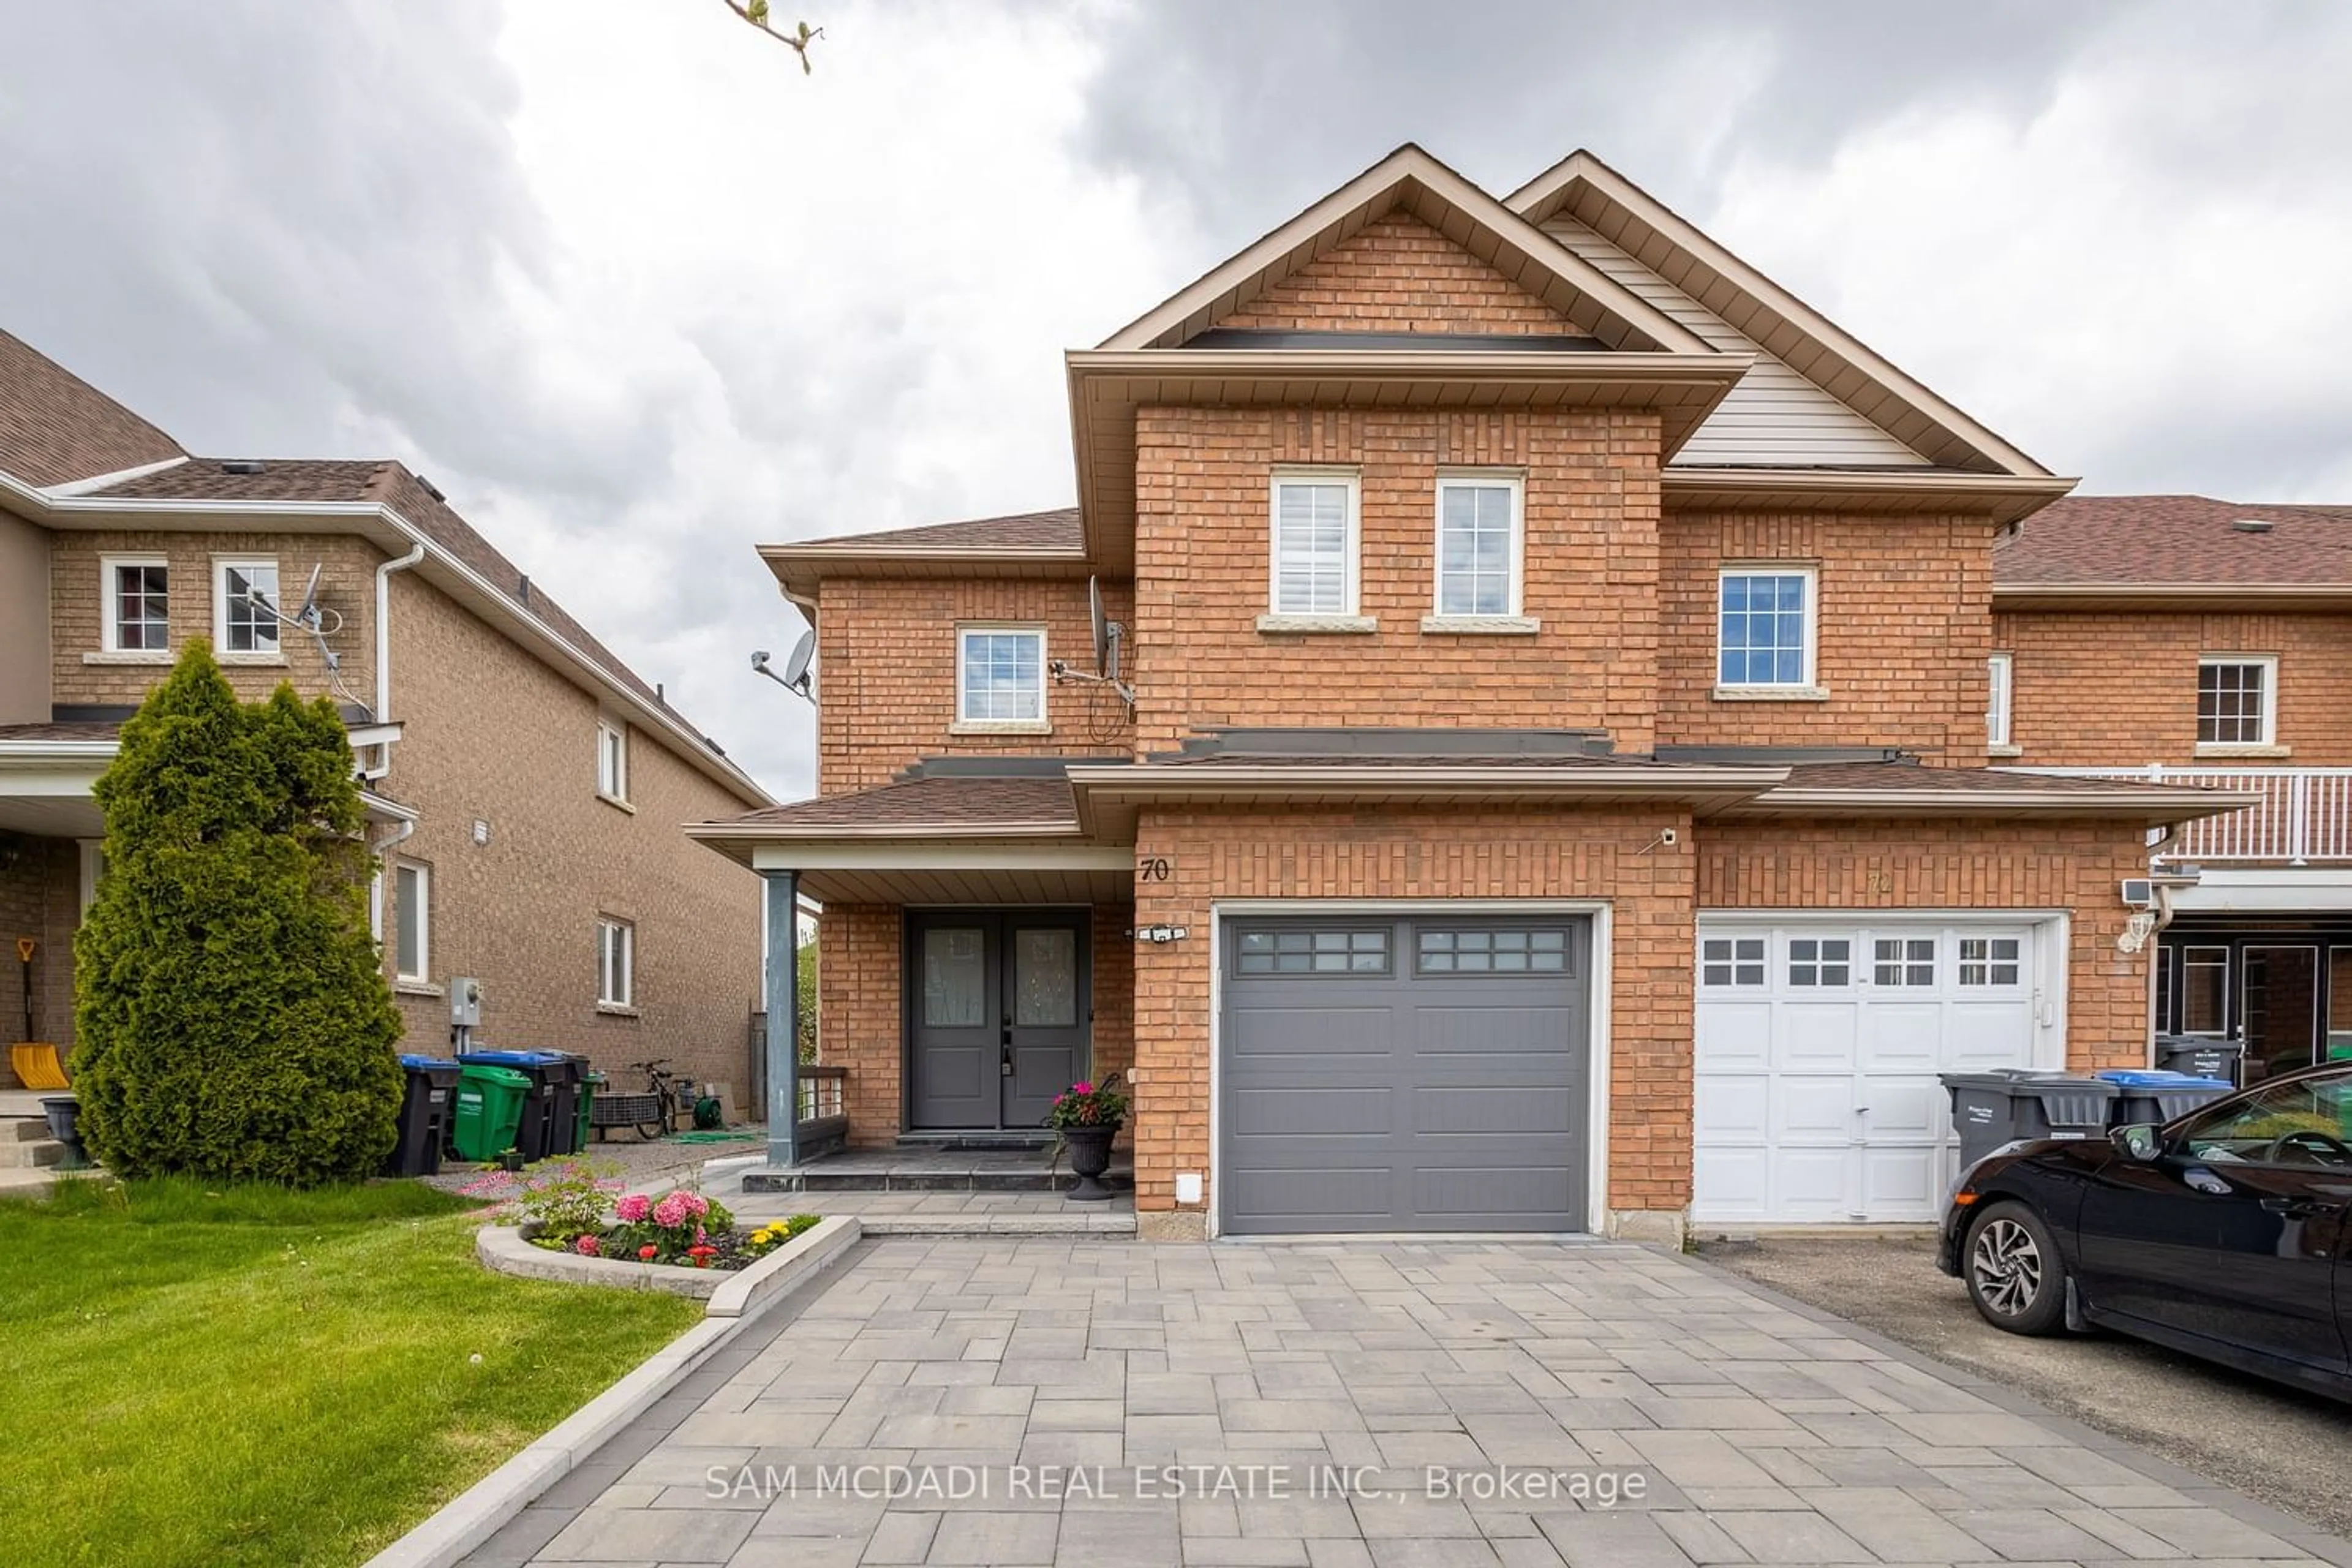 Home with brick exterior material for 70 Culture Cres, Brampton Ontario L6Y 5A2